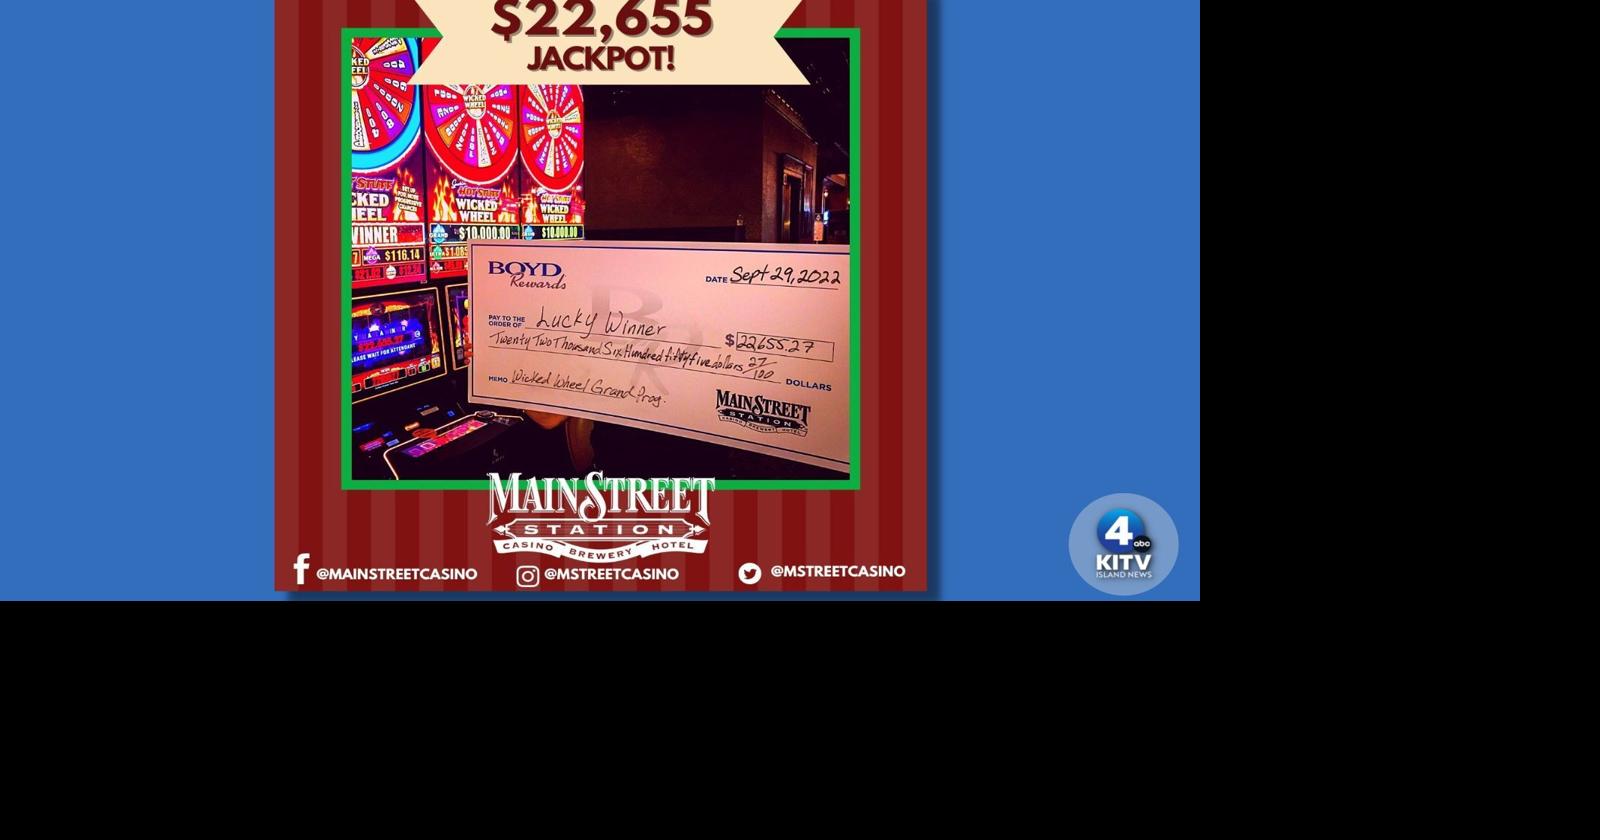 Hawaii resident wins over $22,000 on penny slot in Las Vegas